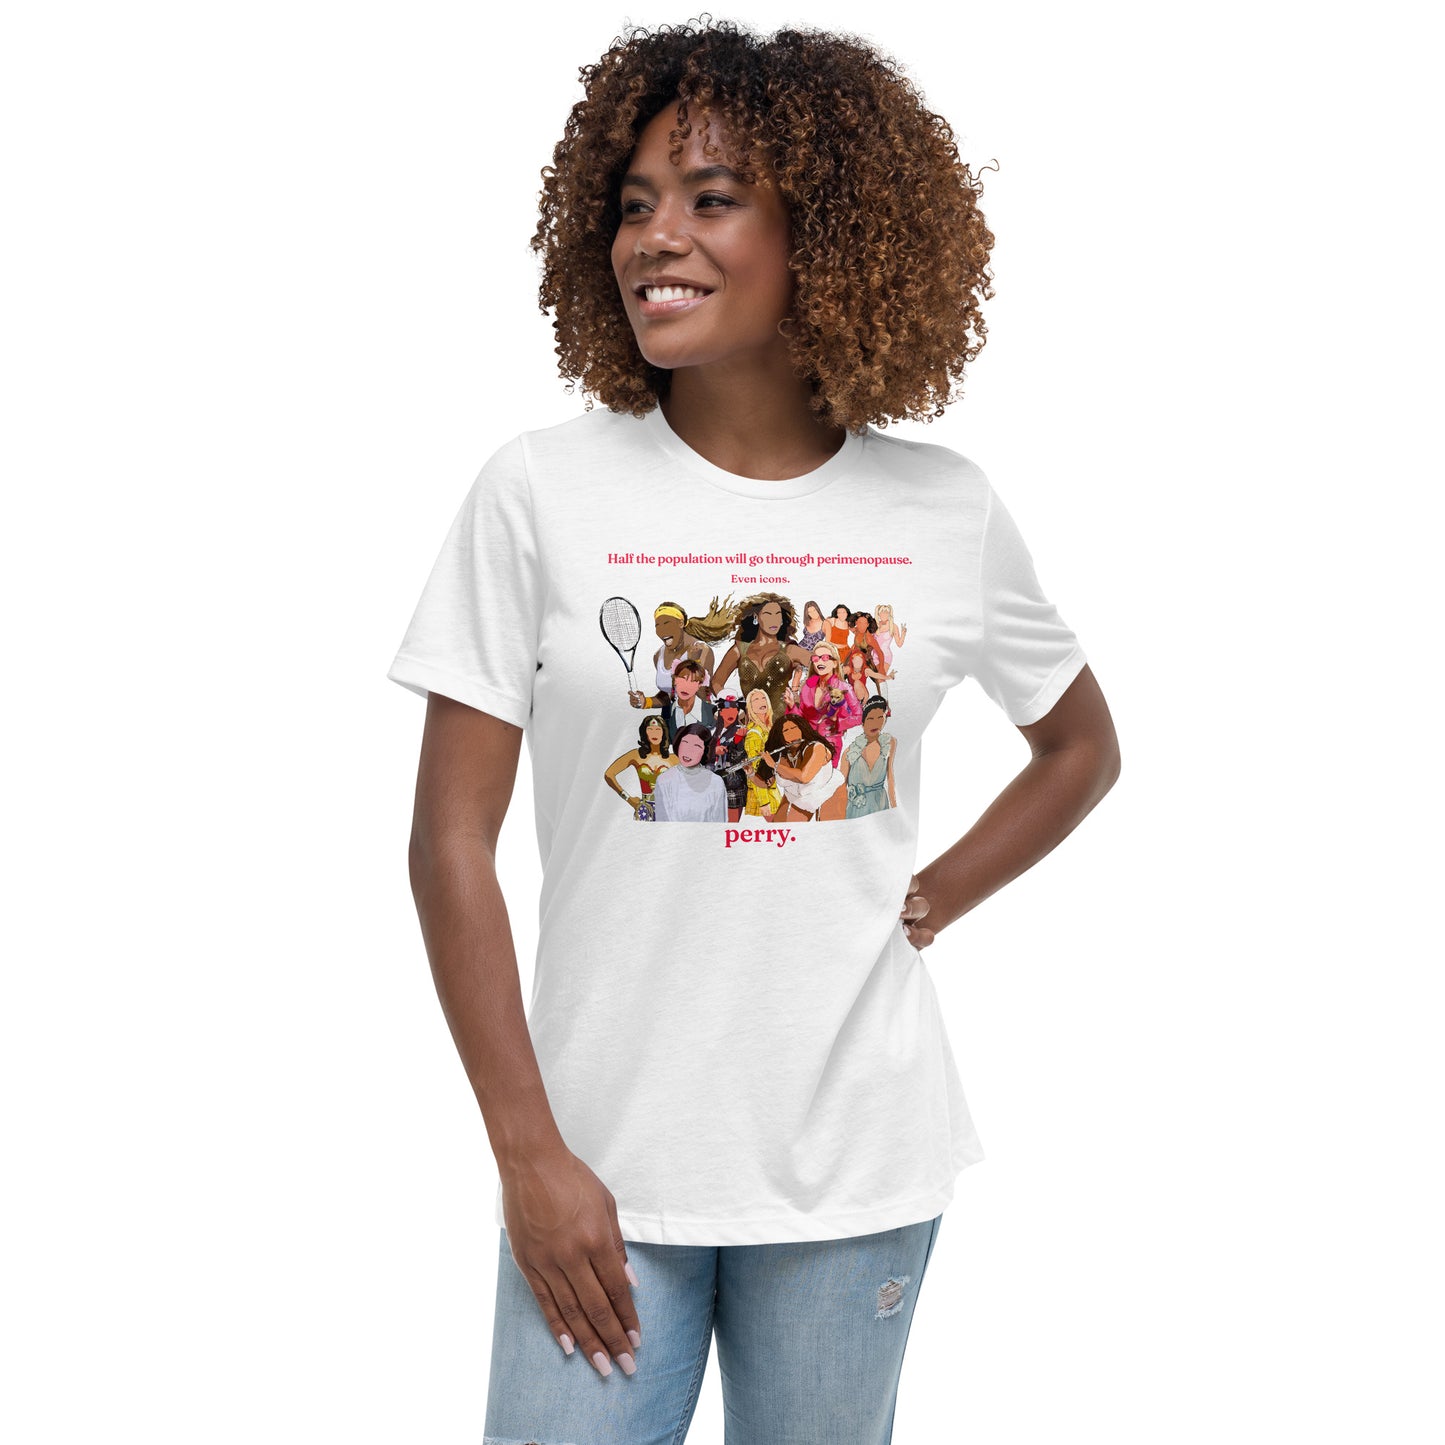 Even Icons Go Through Perimenopause - Relaxed T-Shirt